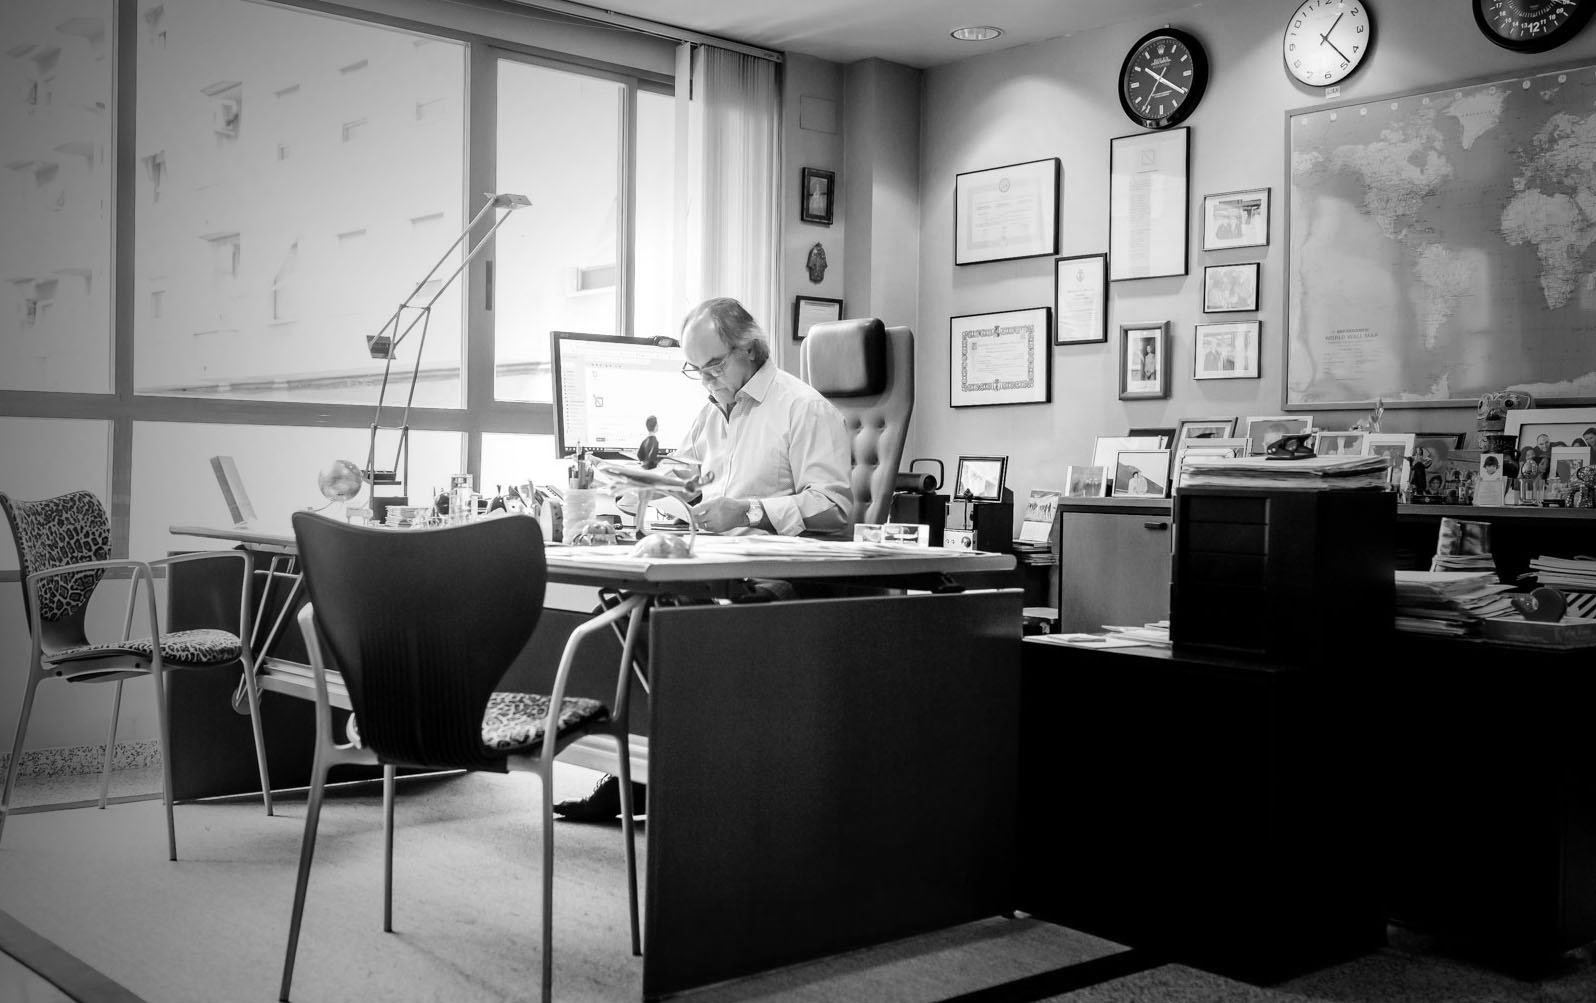 Francisco R. Pomares working at his office